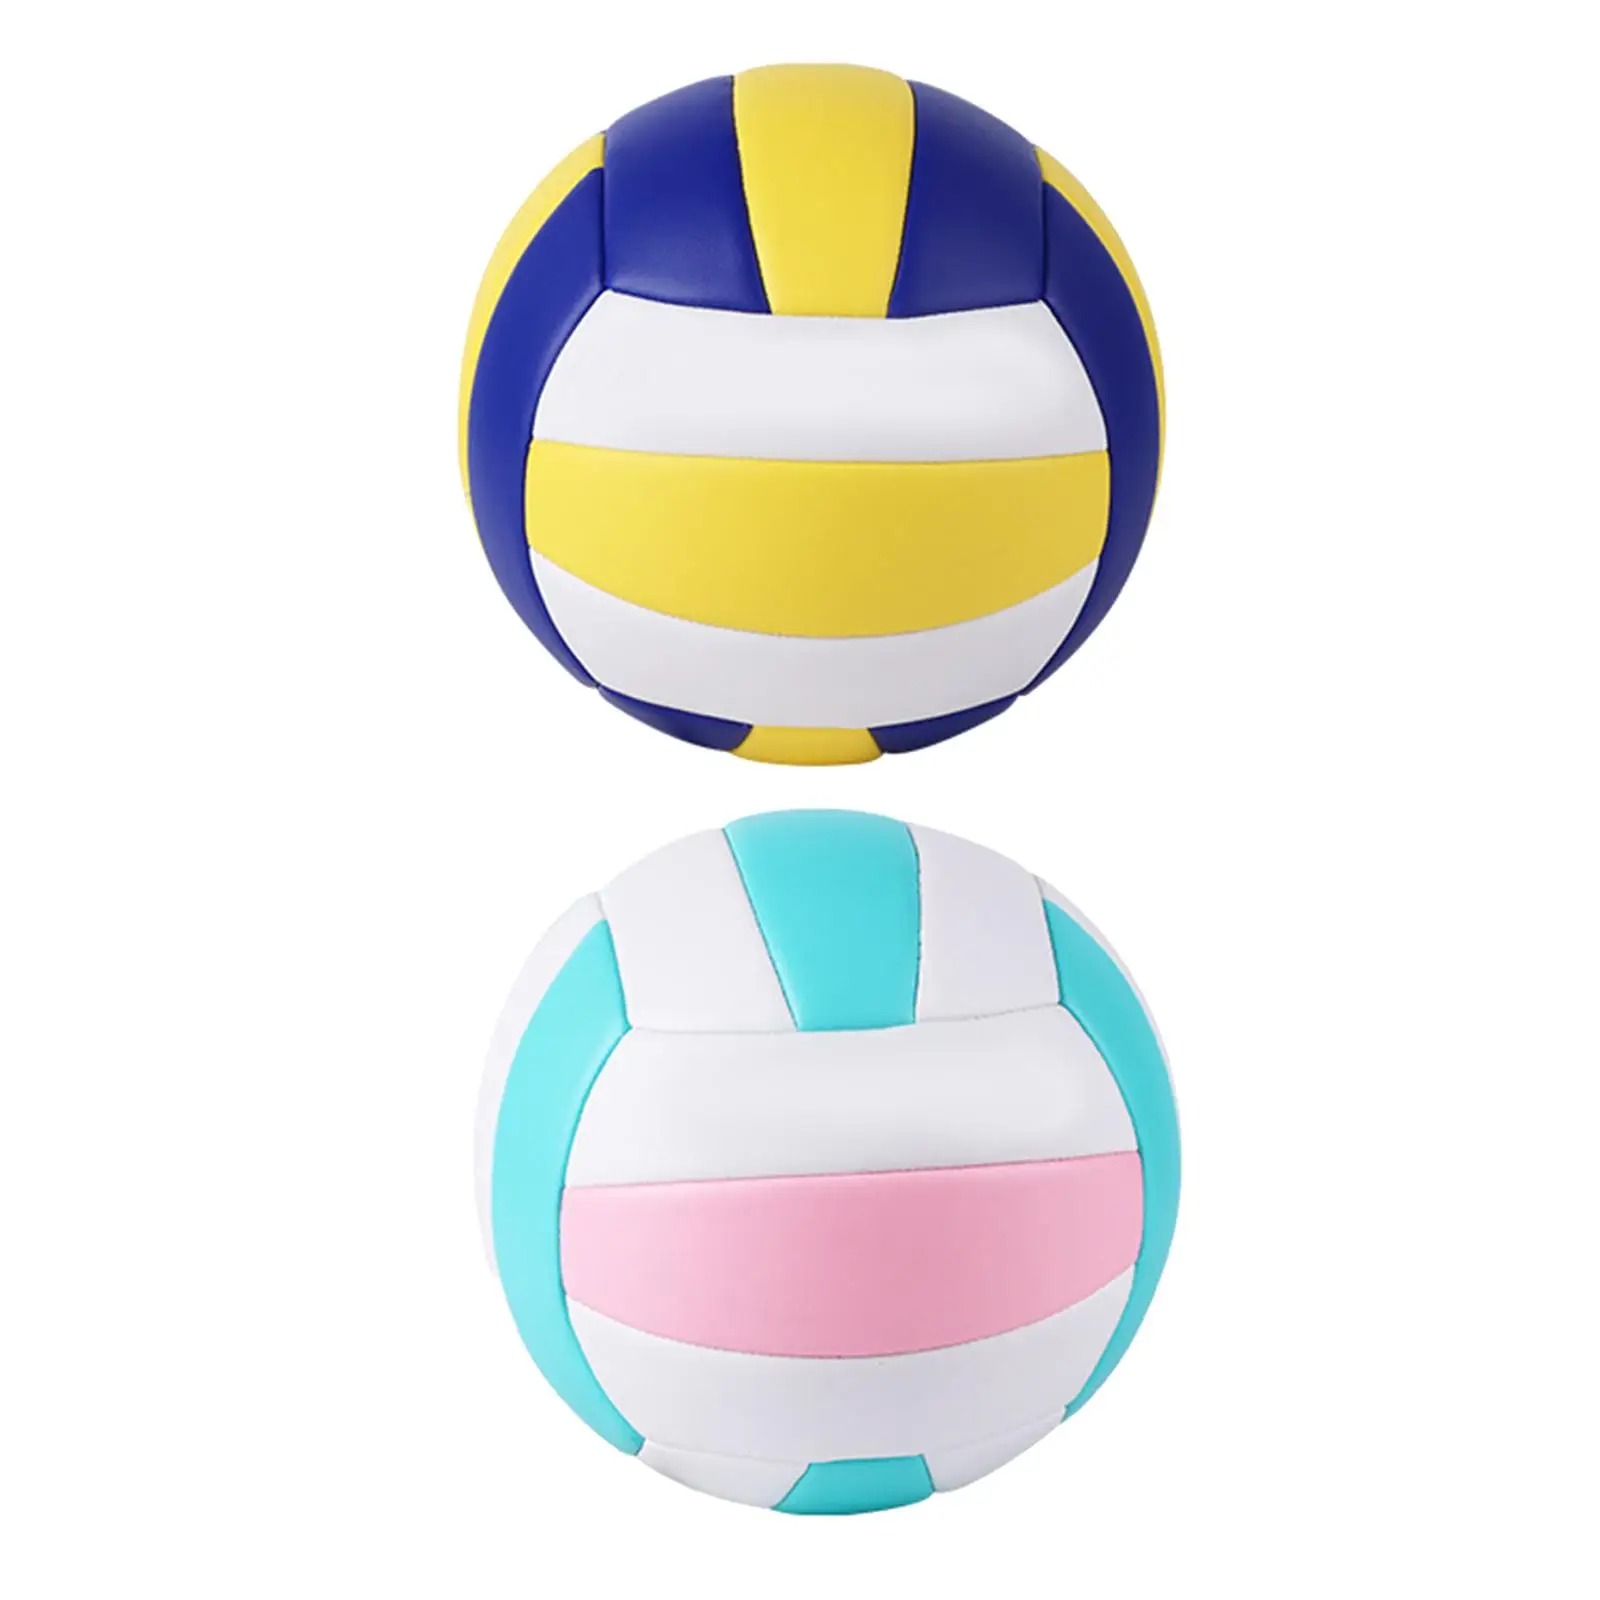 Standard Size 5 Indoor Volleyball PU Leather Leisure Ball with Inflator Pool  Game for Kids